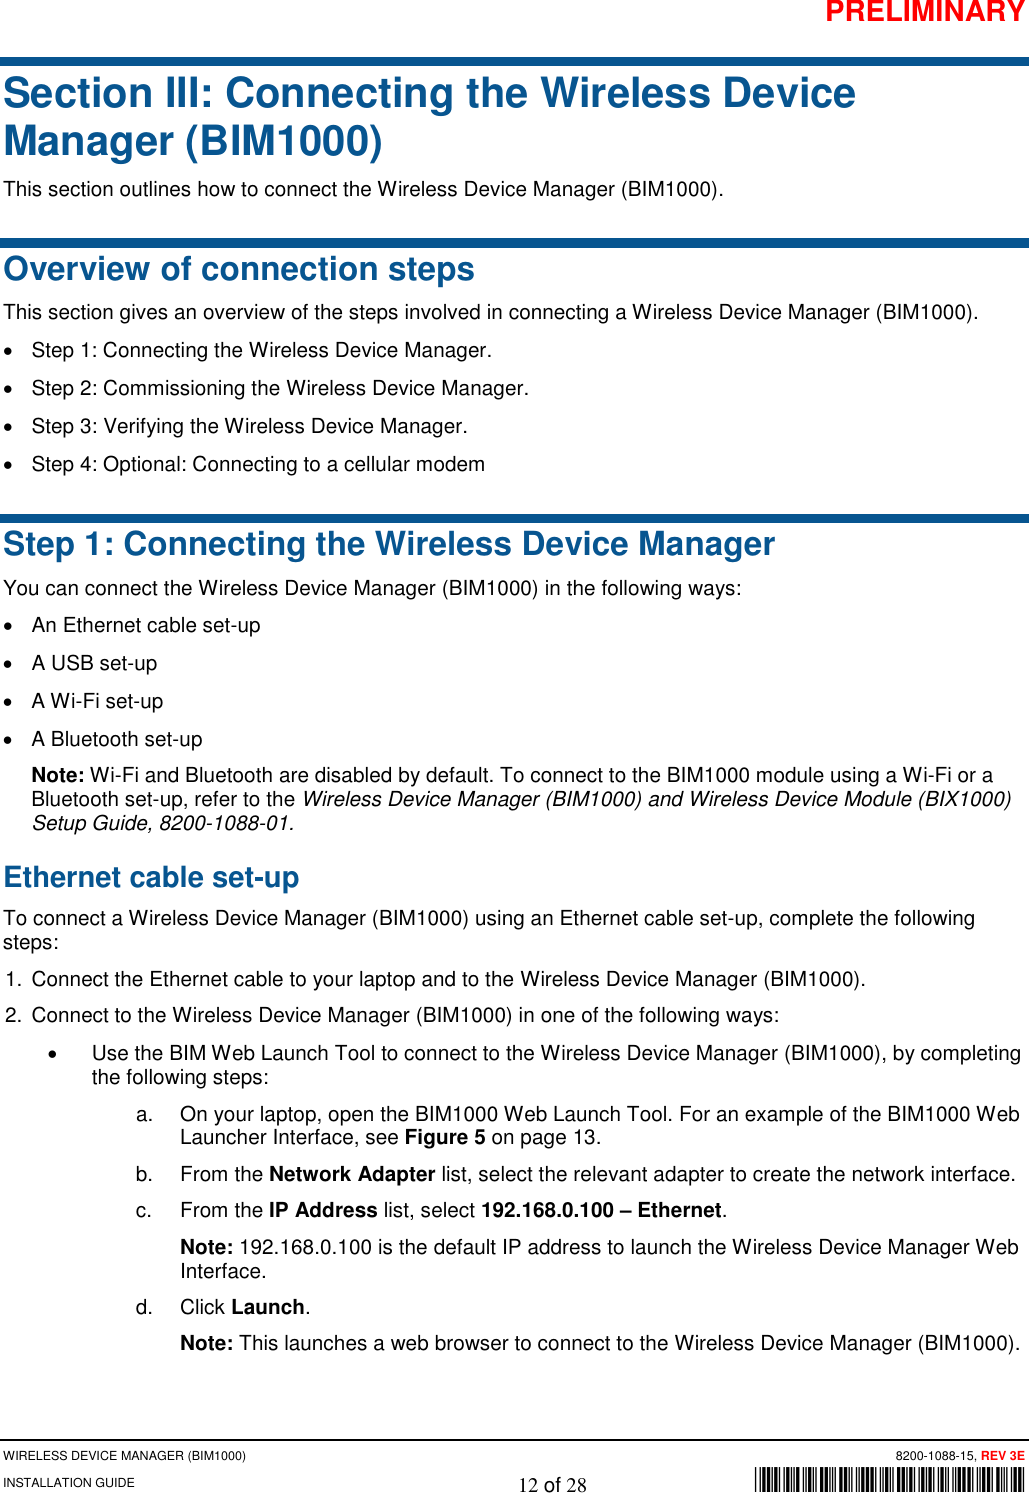 PRELIMINARY WIRELESS DEVICE MANAGER (BIM1000)      8200-1088-15, REV 3E INSTALLATION GUIDE    12 of 28        *8200-1088-15* Section III: Connecting the Wireless Device Manager (BIM1000) This section outlines how to connect the Wireless Device Manager (BIM1000). Overview of connection steps This section gives an overview of the steps involved in connecting a Wireless Device Manager (BIM1000). • Step 1: Connecting the Wireless Device Manager. • Step 2: Commissioning the Wireless Device Manager. • Step 3: Verifying the Wireless Device Manager. • Step 4: Optional: Connecting to a cellular modem Step 1: Connecting the Wireless Device Manager You can connect the Wireless Device Manager (BIM1000) in the following ways: • An Ethernet cable set-up • A USB set-up • A Wi-Fi set-up • A Bluetooth set-up Note: Wi-Fi and Bluetooth are disabled by default. To connect to the BIM1000 module using a Wi-Fi or a Bluetooth set-up, refer to the Wireless Device Manager (BIM1000) and Wireless Device Module (BIX1000) Setup Guide, 8200-1088-01.  Ethernet cable set-up  To connect a Wireless Device Manager (BIM1000) using an Ethernet cable set-up, complete the following steps: 1. Connect the Ethernet cable to your laptop and to the Wireless Device Manager (BIM1000).  2.  Connect to the Wireless Device Manager (BIM1000) in one of the following ways: • Use the BIM Web Launch Tool to connect to the Wireless Device Manager (BIM1000), by completing the following steps: a. On your laptop, open the BIM1000 Web Launch Tool. For an example of the BIM1000 Web Launcher Interface, see Figure 5 on page 13. b. From the Network Adapter list, select the relevant adapter to create the network interface. c. From the IP Address list, select 192.168.0.100 – Ethernet. Note: 192.168.0.100 is the default IP address to launch the Wireless Device Manager Web Interface. d. Click Launch. Note: This launches a web browser to connect to the Wireless Device Manager (BIM1000). 